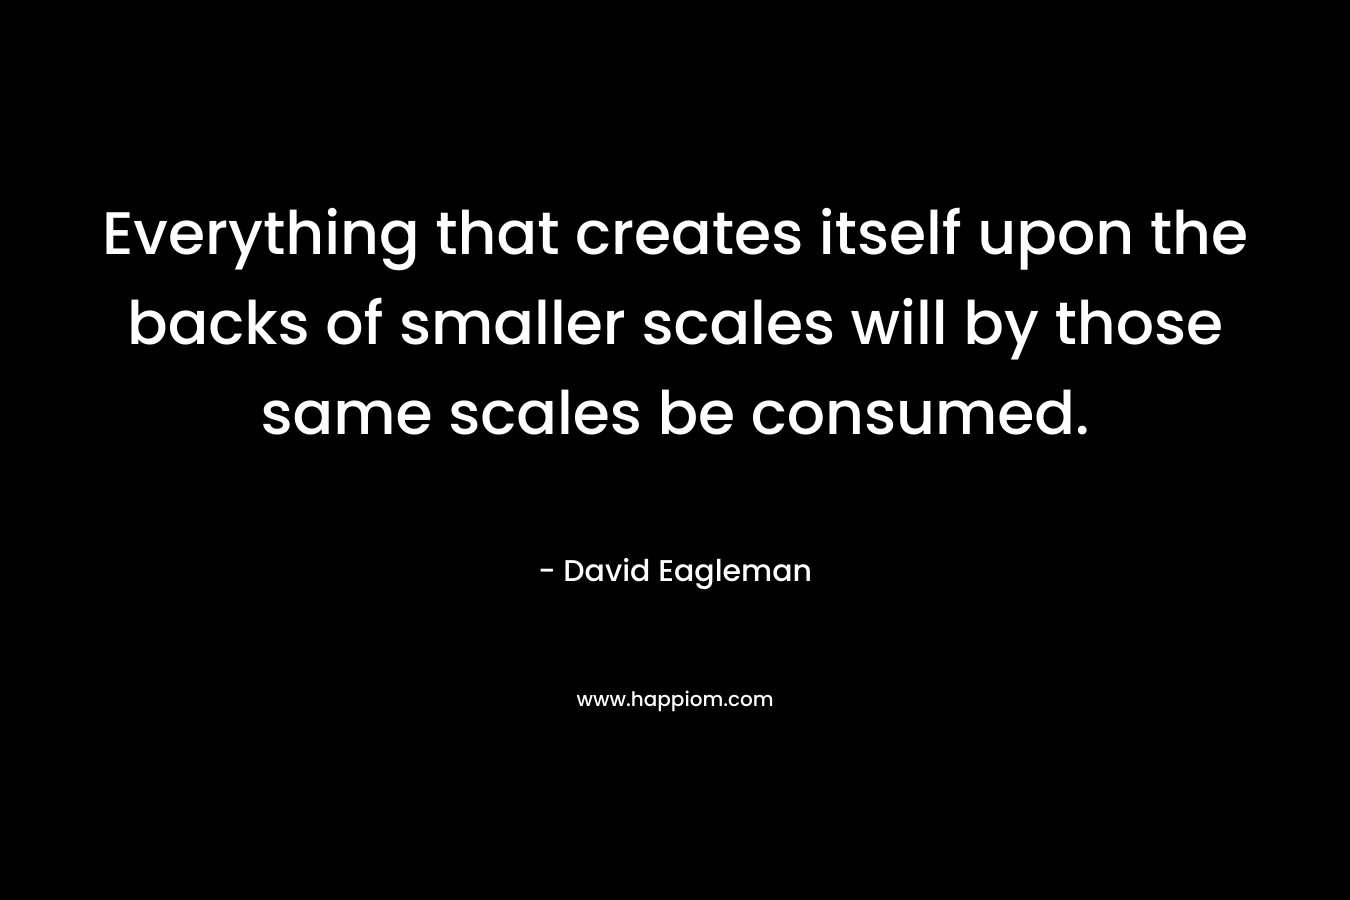 Everything that creates itself upon the backs of smaller scales will by those same scales be consumed.